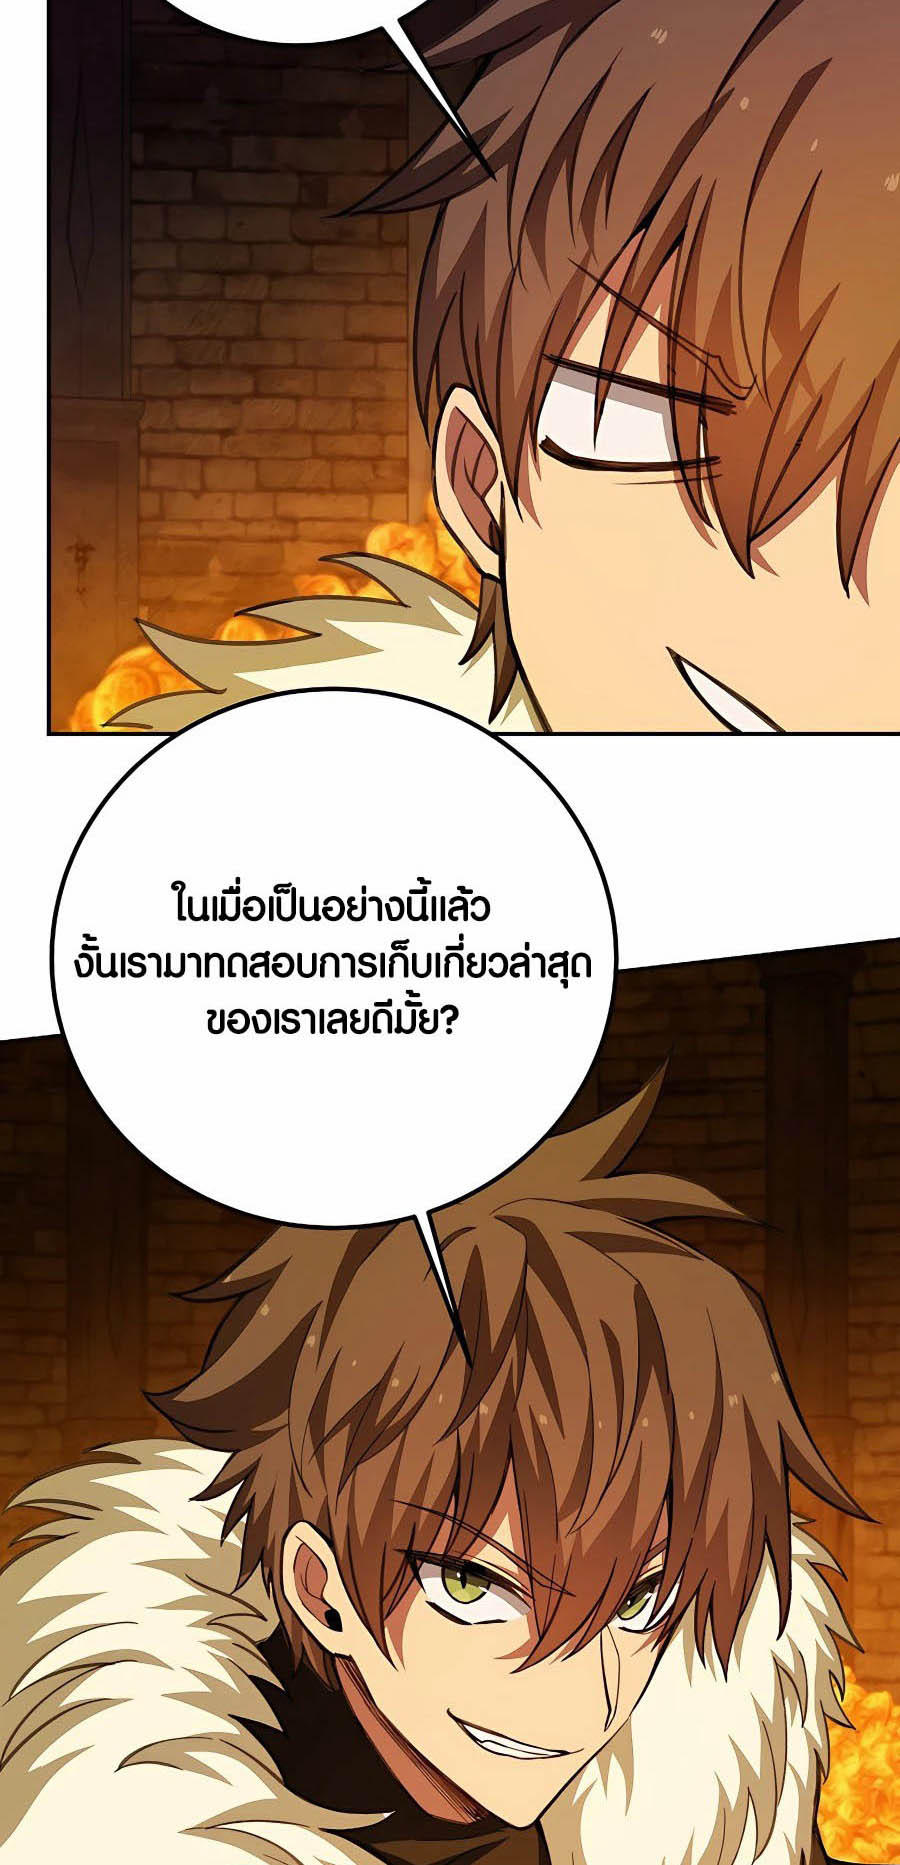 à¸­à¹ˆà¸²à¸™à¸¡à¸±à¸™à¸®à¸§à¸² à¹€à¸£à¸·à¹ˆà¸­à¸‡ The Part Time Land of the Gods 56 85